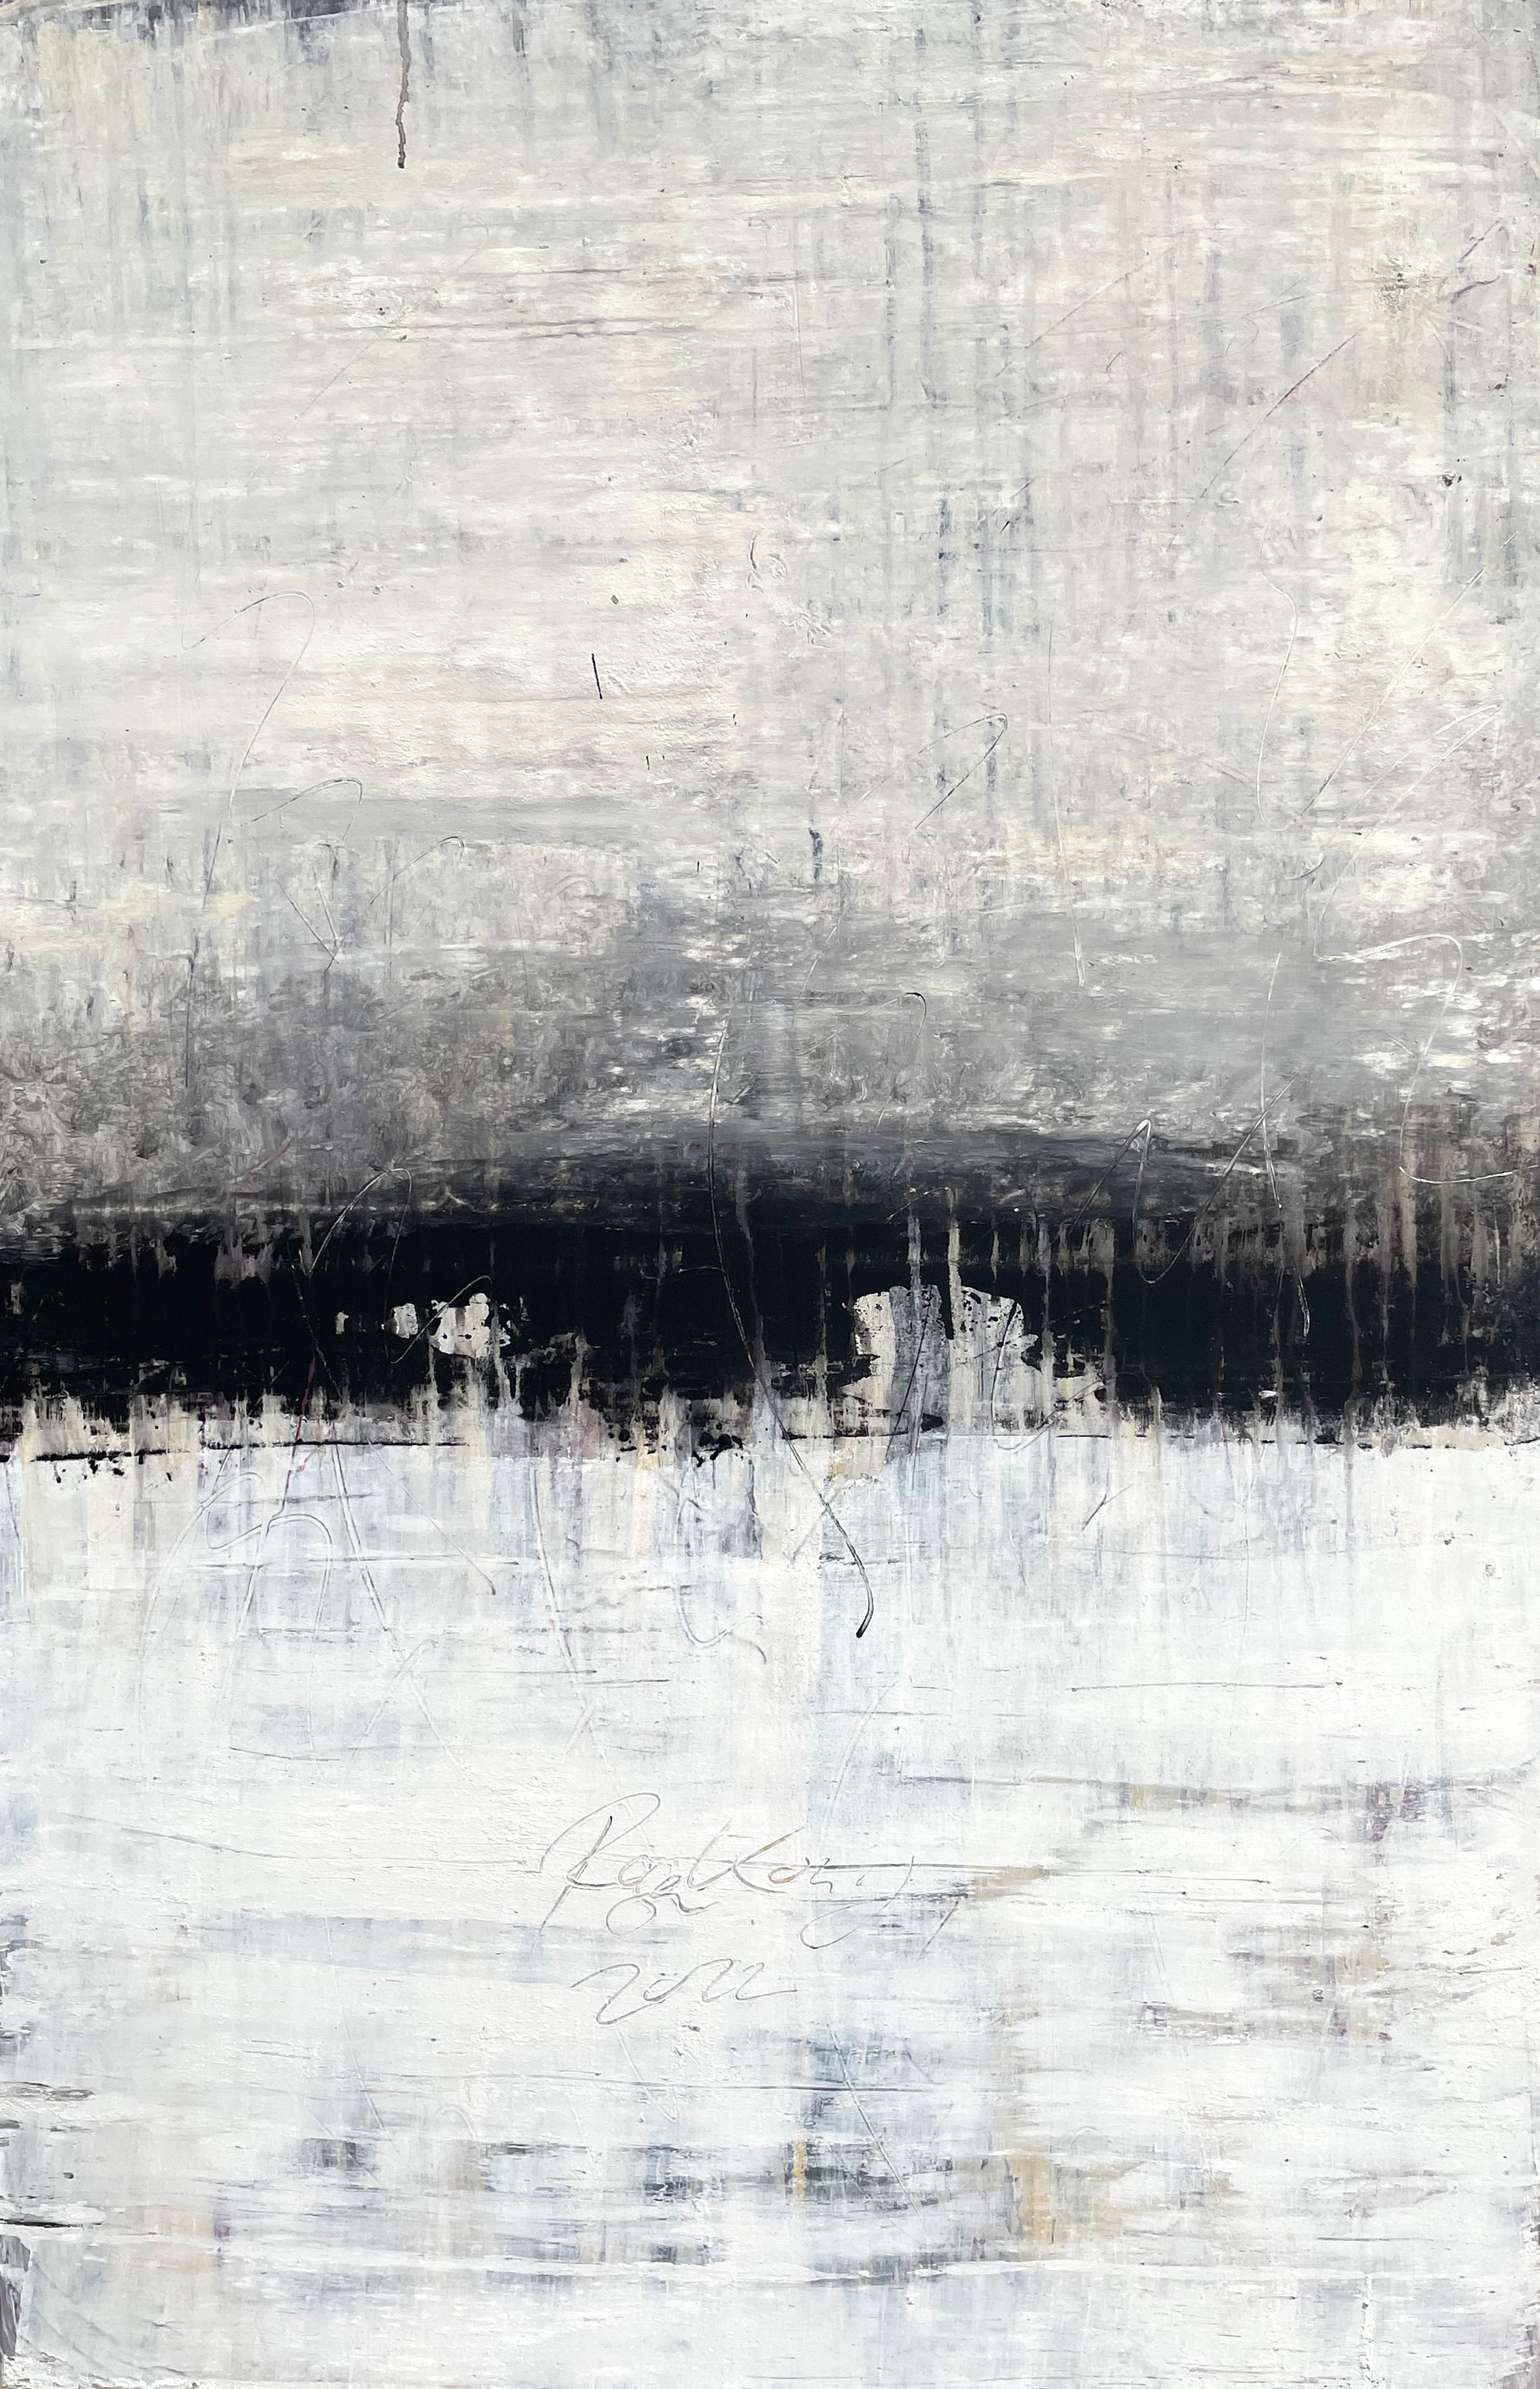 Roger König Landscape Painting - "Antique Black/White " FQK3, Abstract Painting , 21st Century, Acrylic